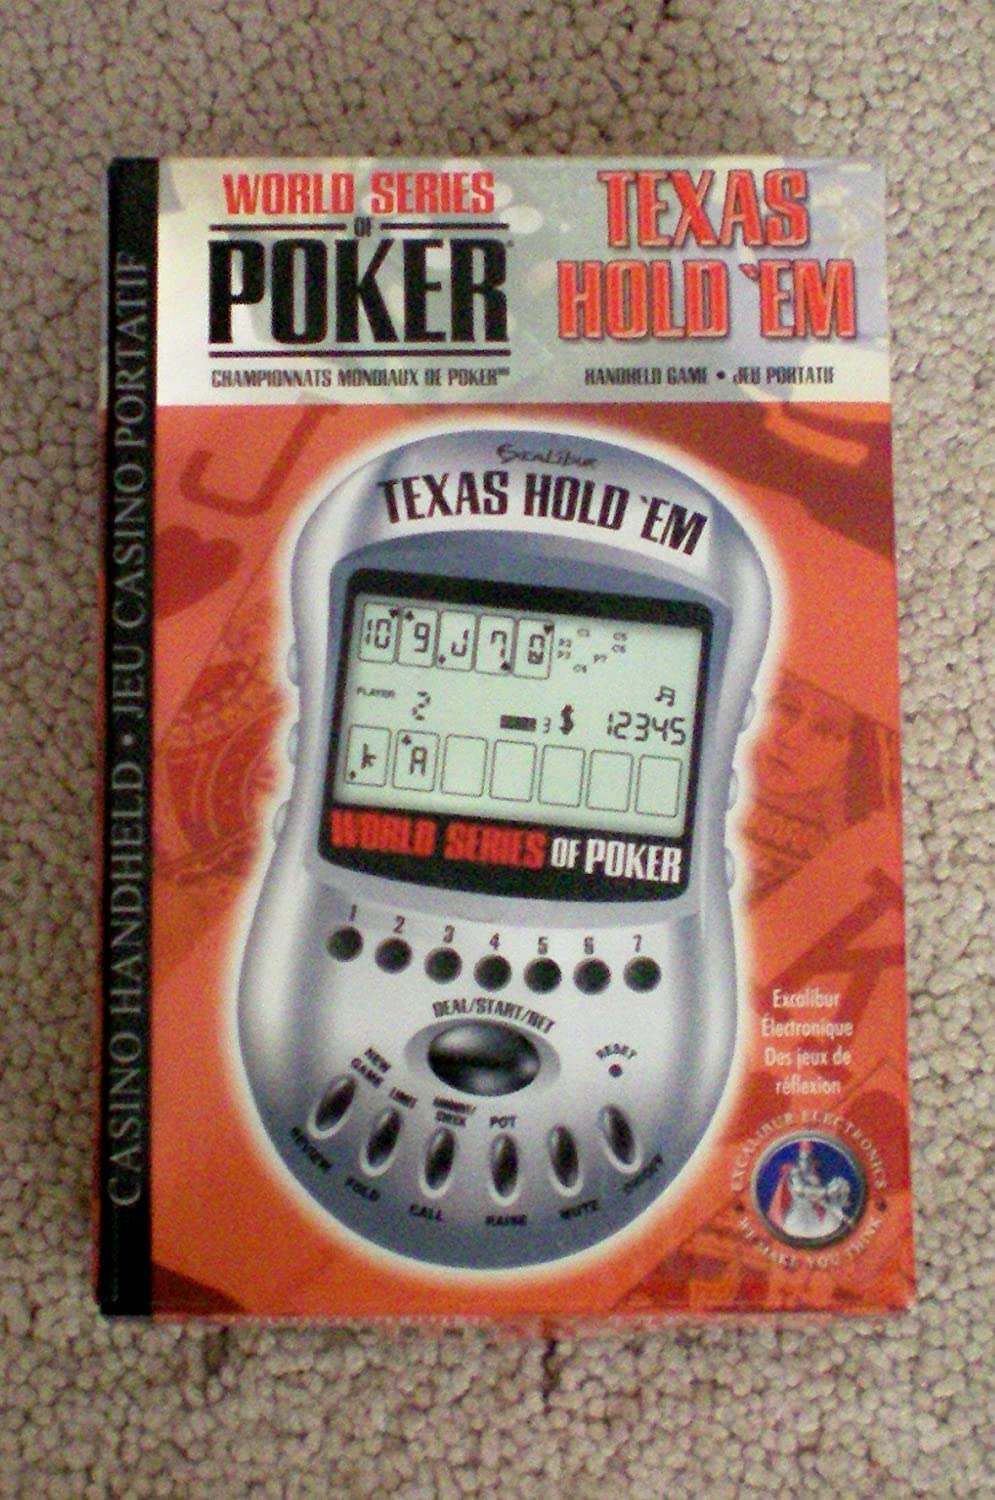 EXCALIBUR TEXAS HOLD EM WORLD SERIES OF POKER ELECTRONIC HANDHELD TOY CARD GAME 